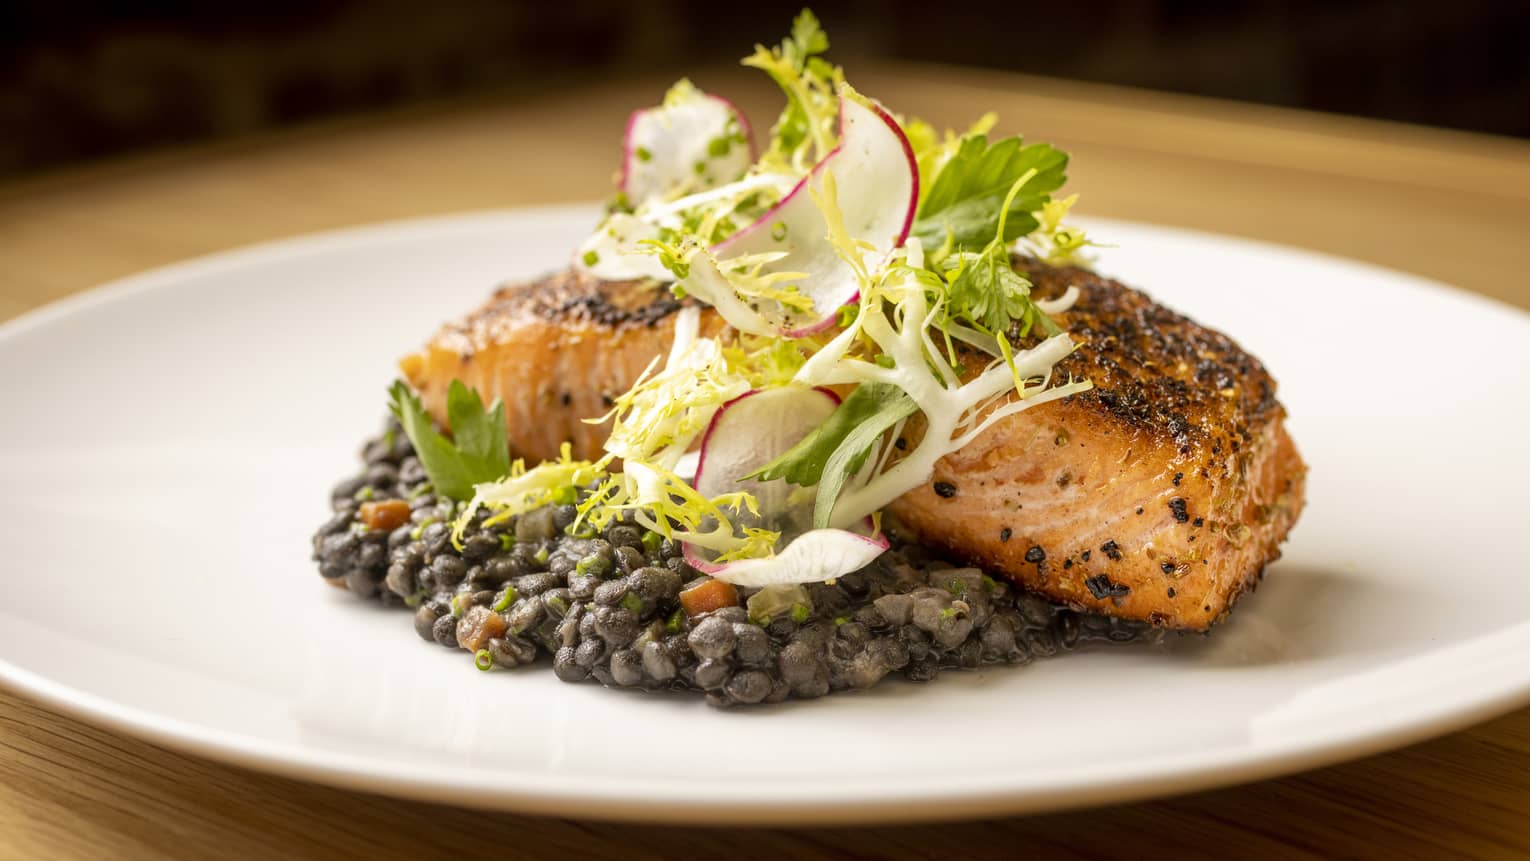 Pan-seared salmon on a bed of Beluga lentils, topped with fris?e and radish salad